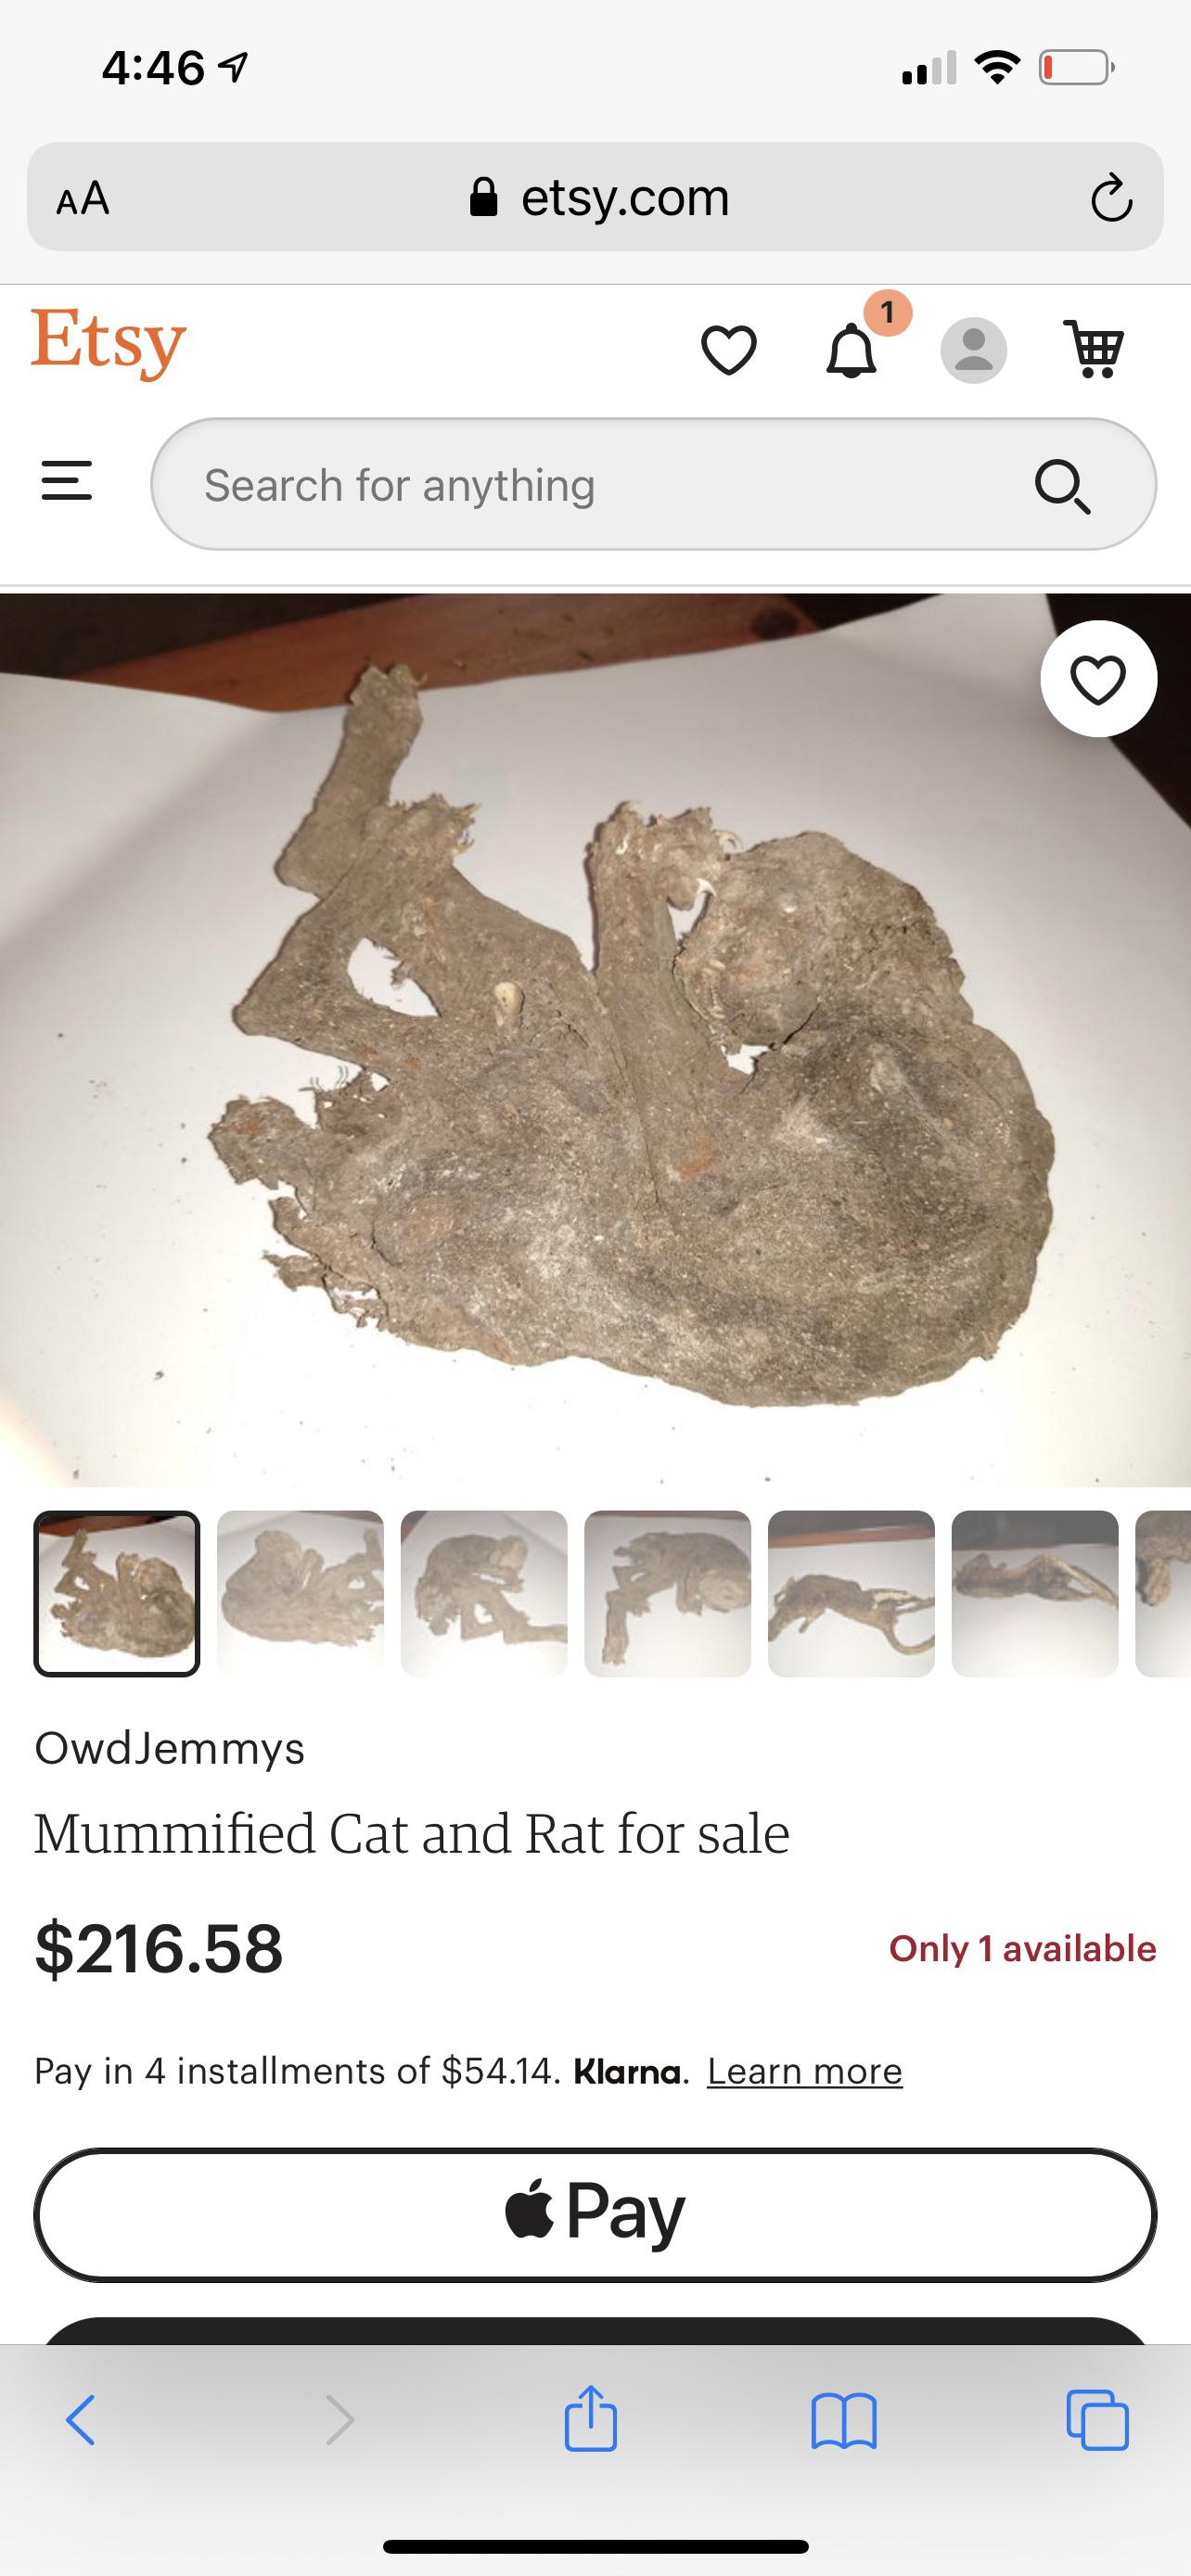 screenshot - 1 Aa etsy.com 1 Etsy Search for anything Q 1P OwdJemmys Mummified Cat and Rat for sale $216.58 Only 1 available Pay in 4 installments of $54.14. Klarna. Learn more Pay r